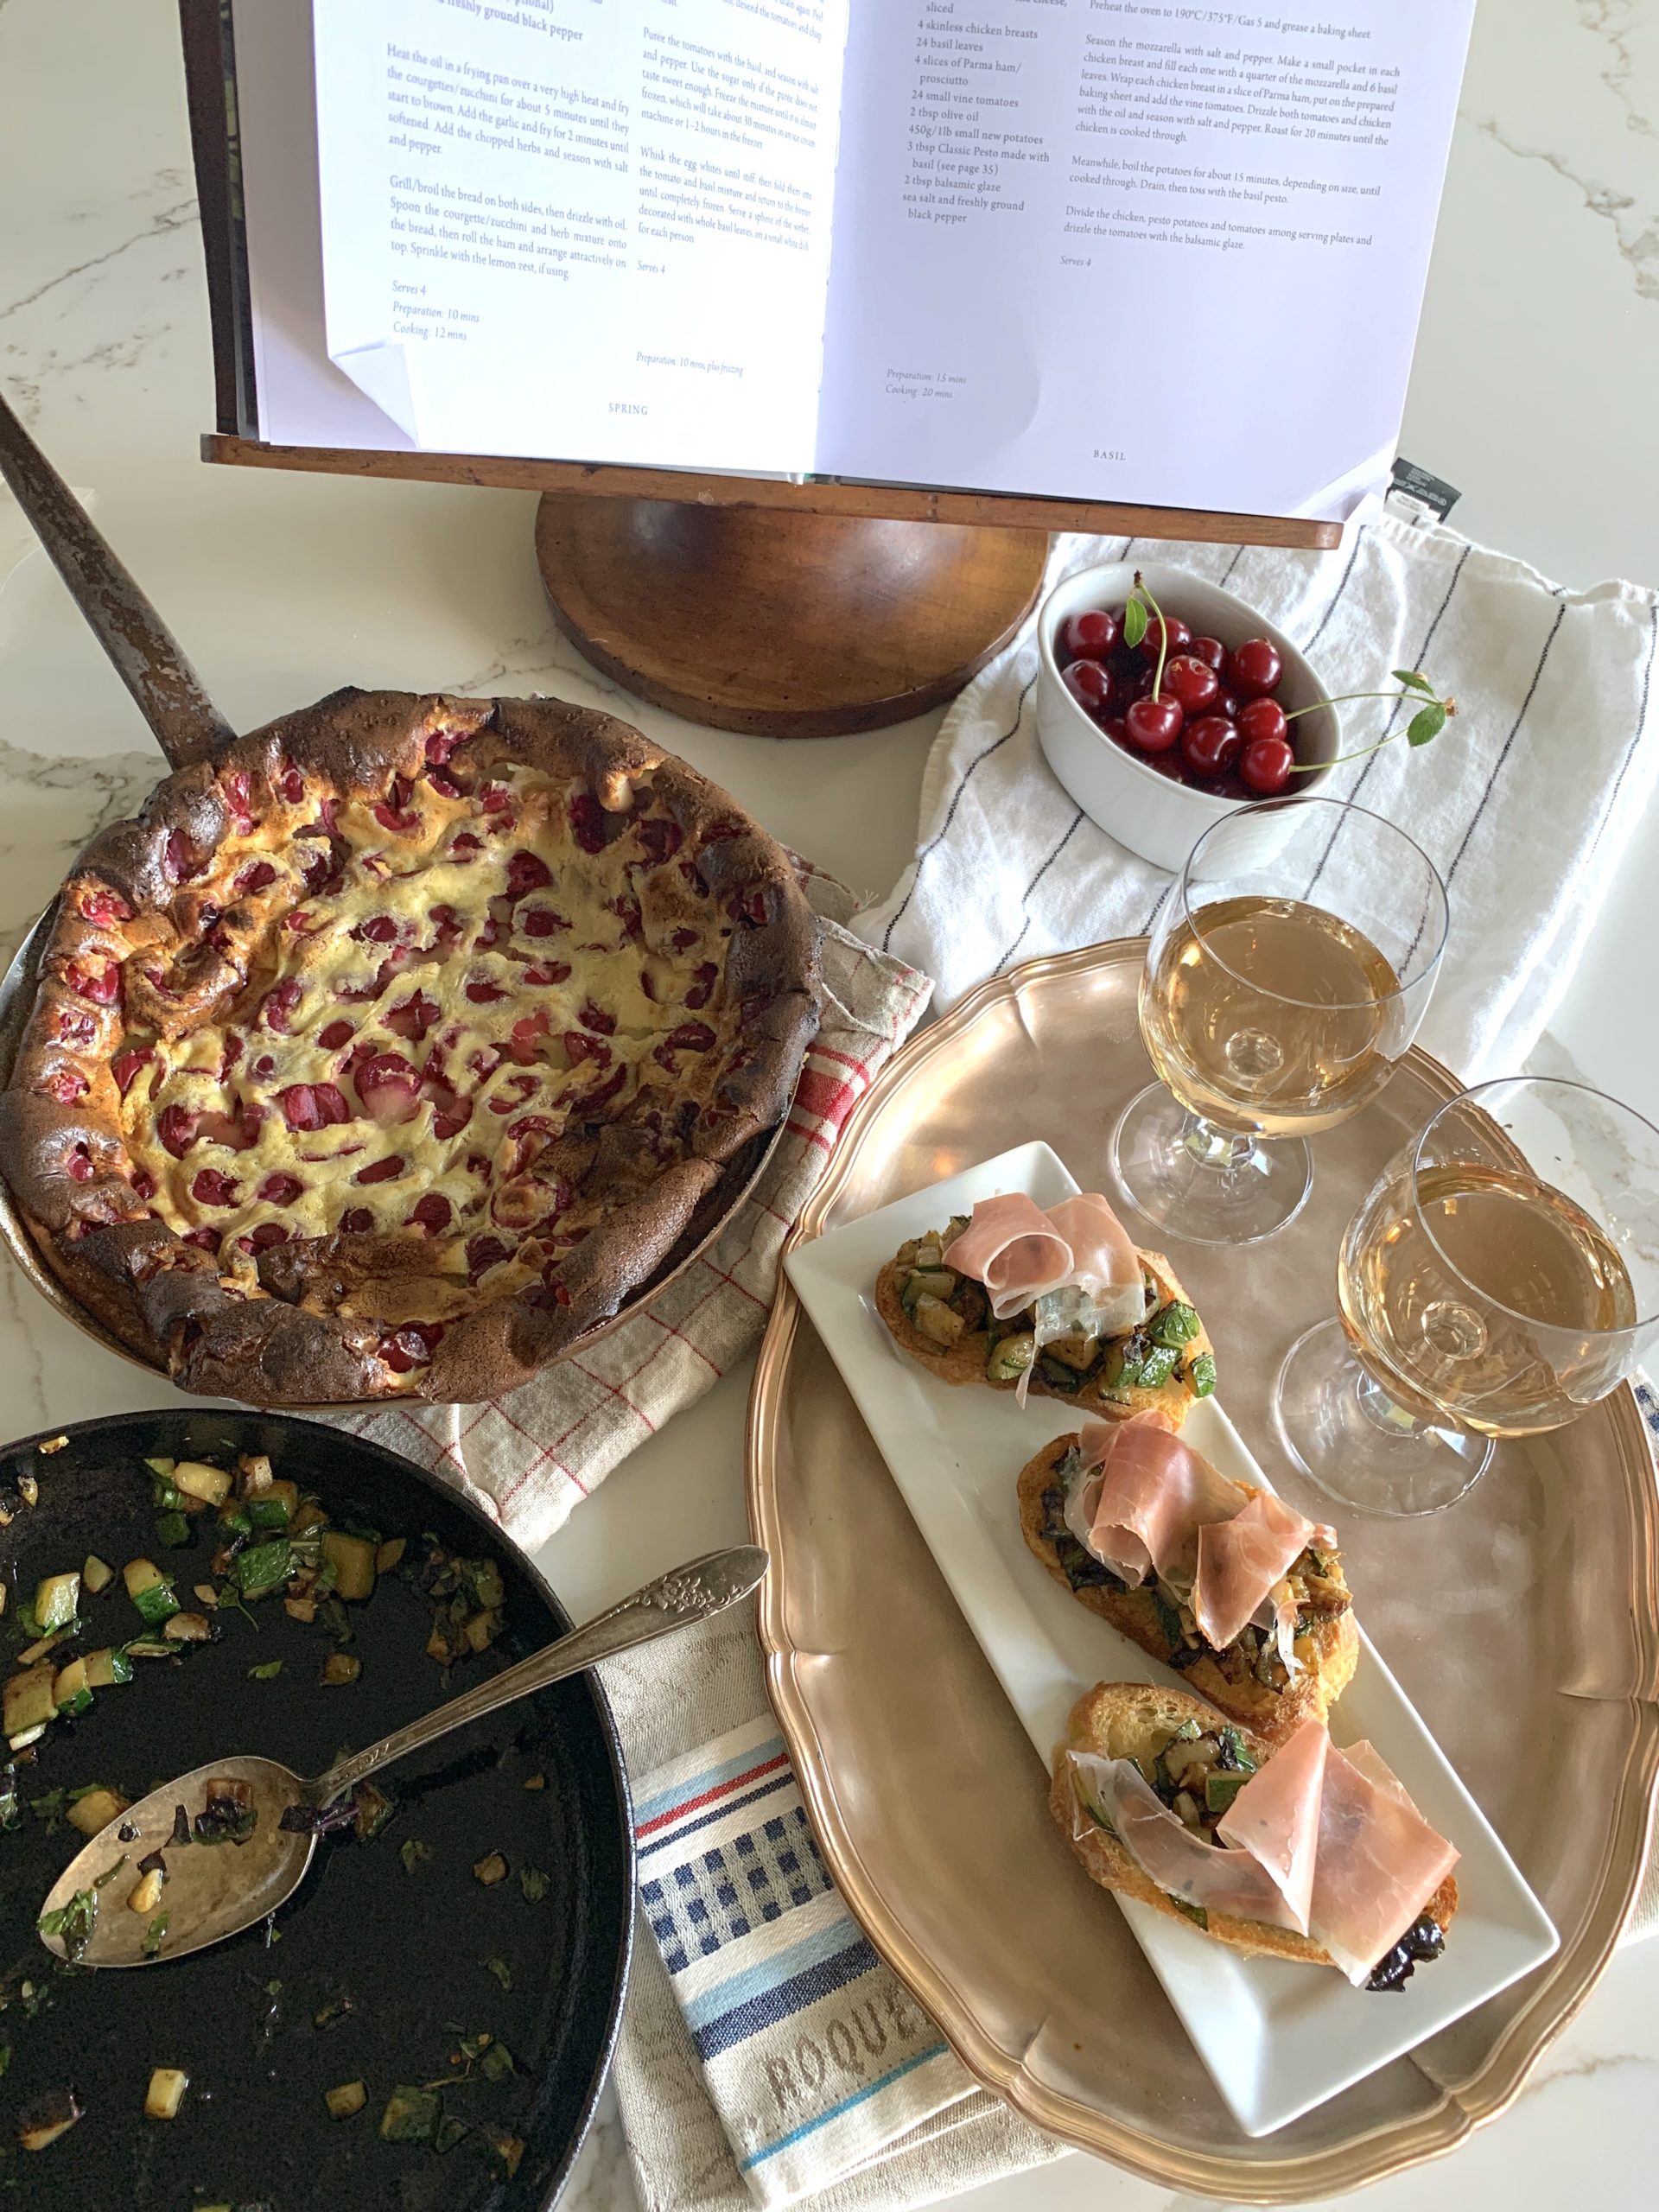 A Meal From the Garden: Clafoutis aux Cerises (Cherry Clafoutis) + Herb, Courgette Bruschetta with Prosciutto